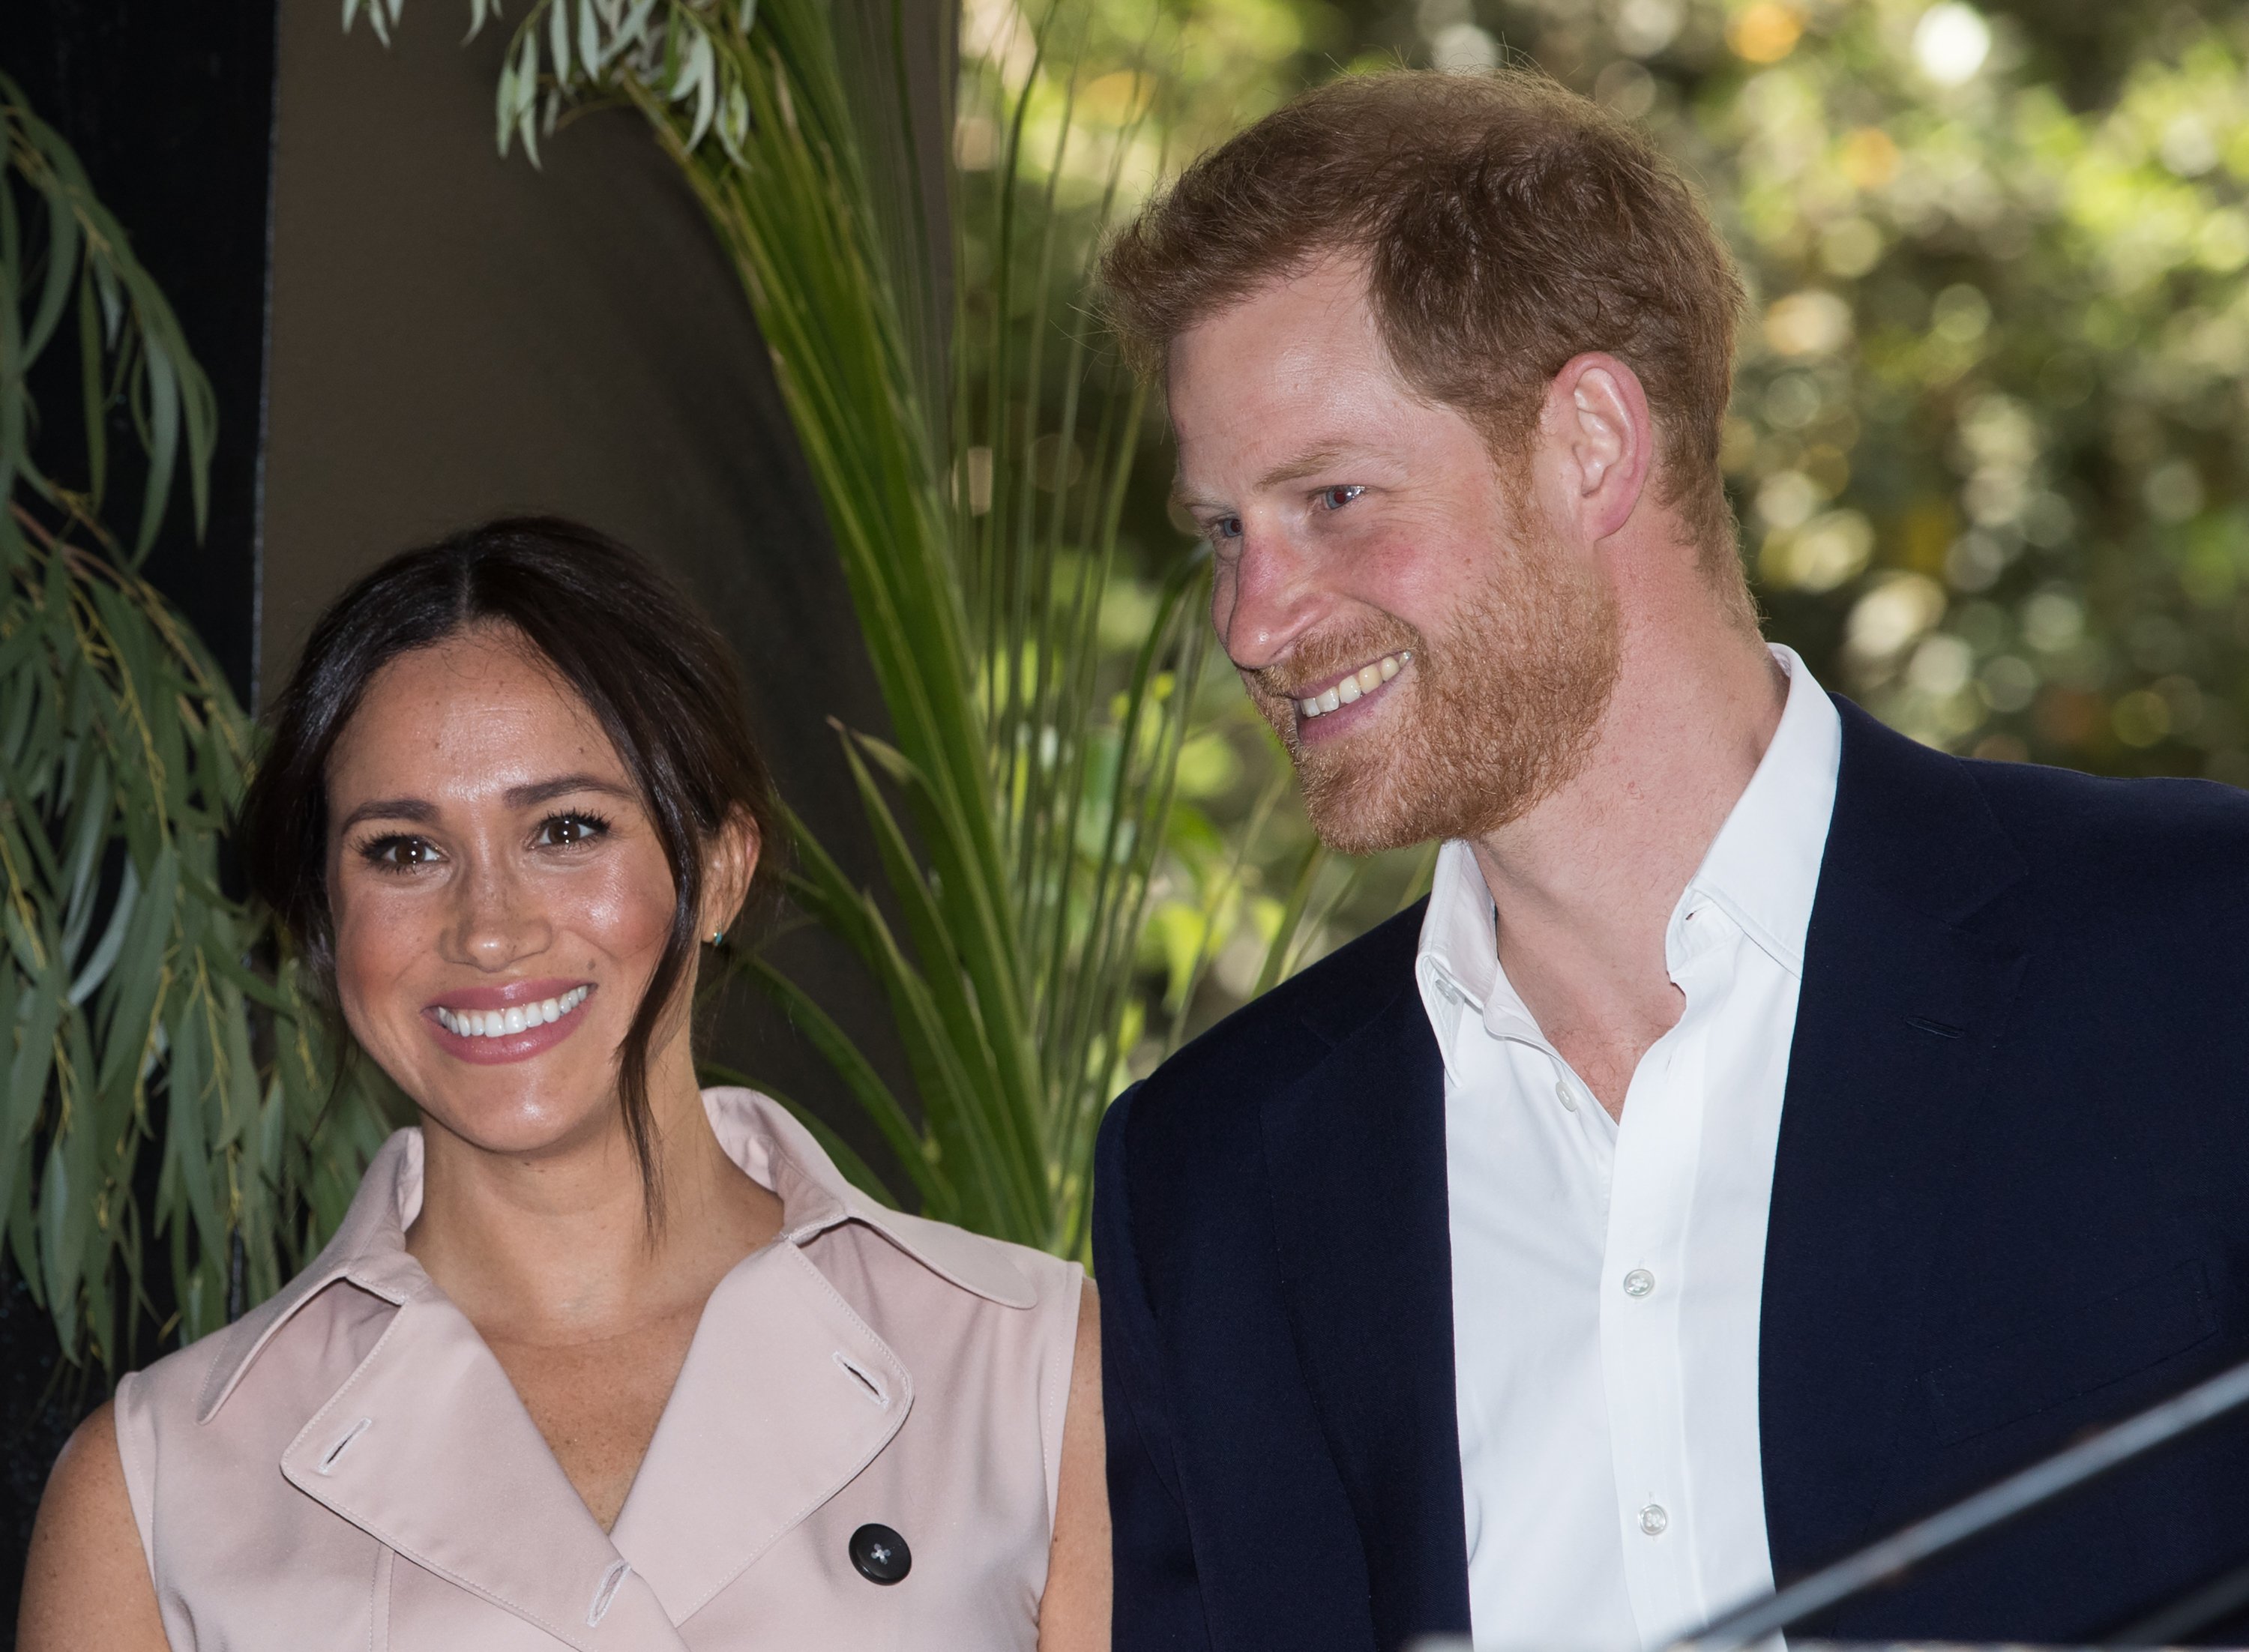 Duchess Meghan and Prince Harry at the British High Commissioner's residence during their royal tour to South Africa on October 2, 2019, in Johannesburg, South Africa. | Source: Pool/Samir Hussein/WireImage/Getty Images